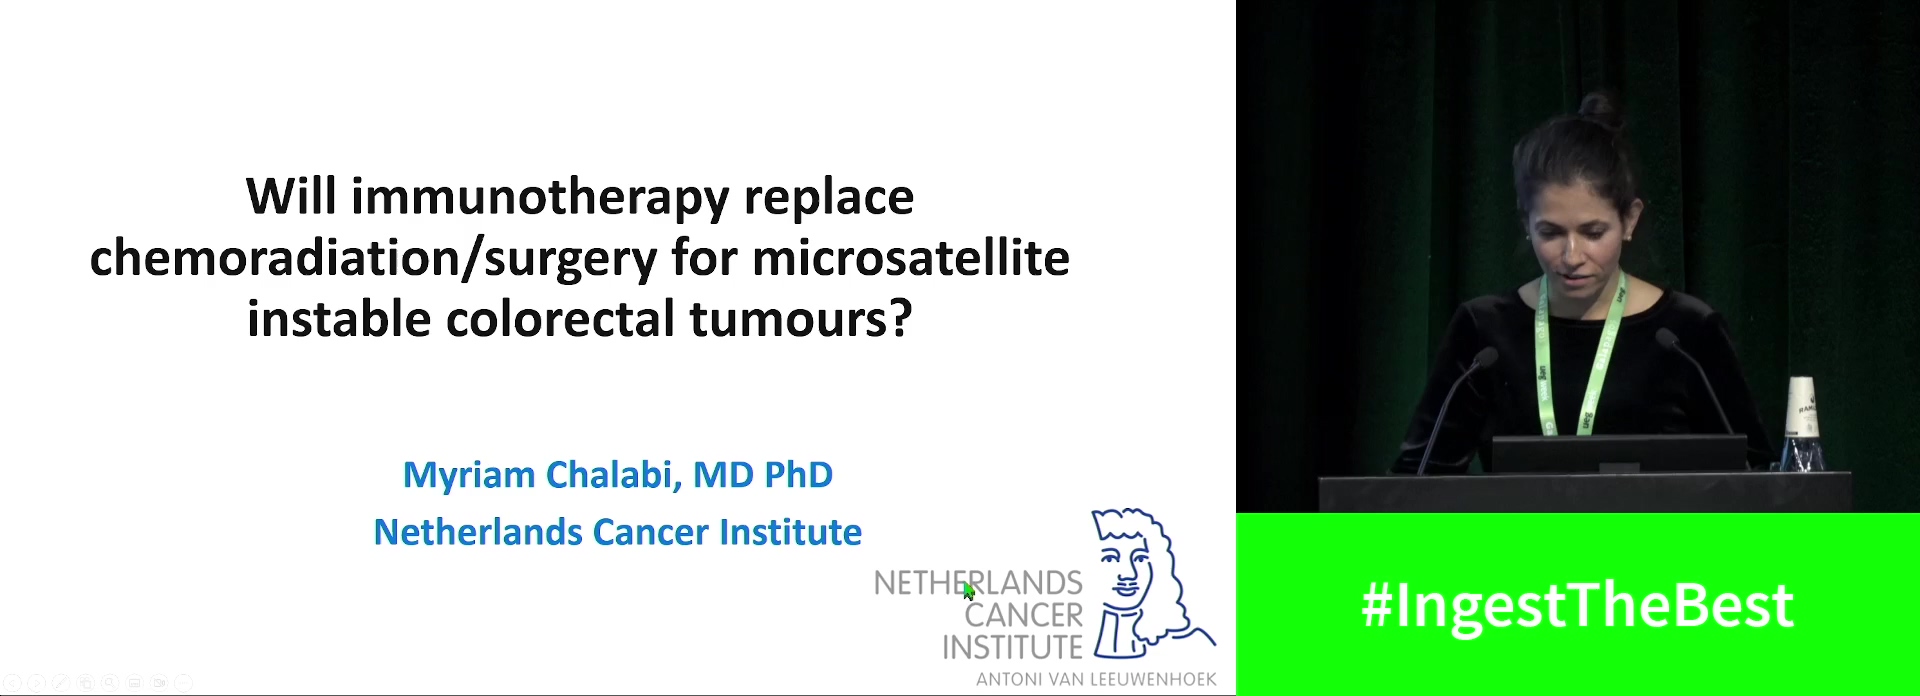 Will immunotherapy replace chemoradiation/surgery for micro satellite instable colorectal tumours?